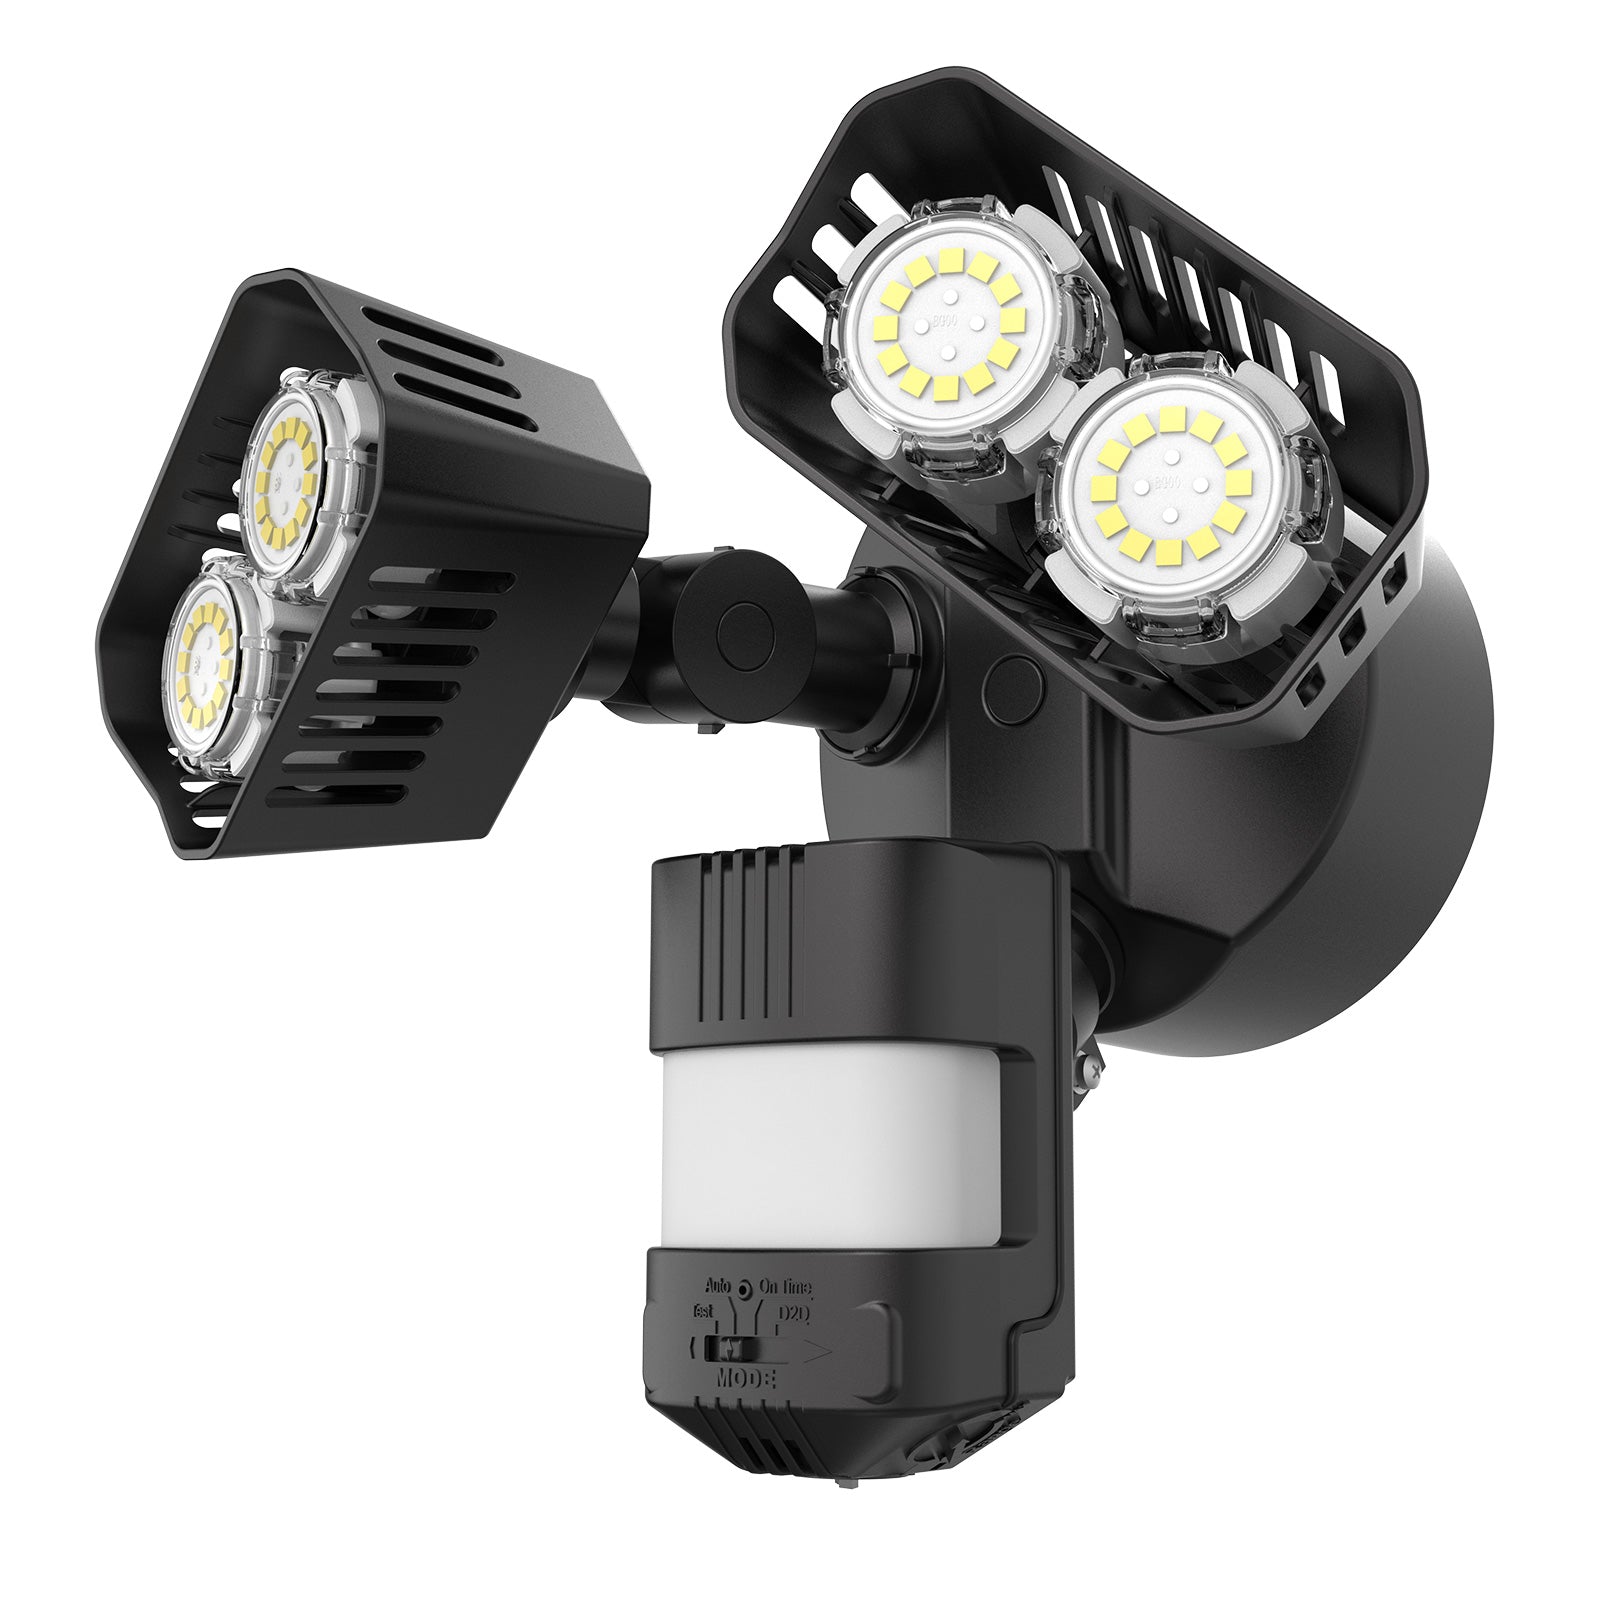 upgraded 28W LED Security Light with the function of Dusk to Dawn & Motion Sensor, black